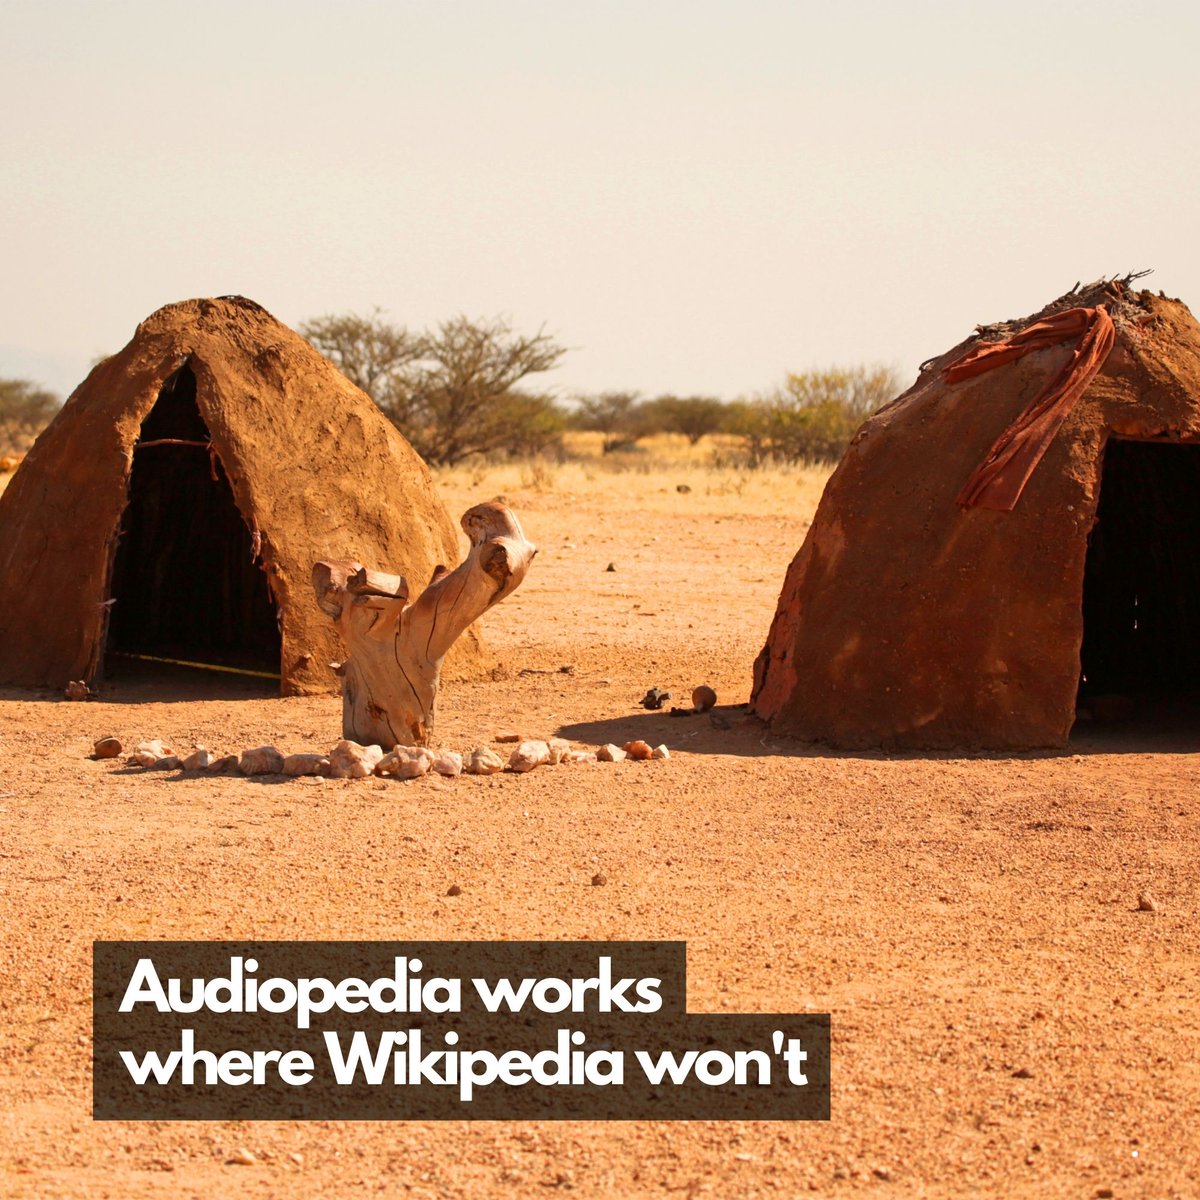 Amidst the harshest climes, #Audiopedia stands as an oasis of knowledge. 🏜️ Share to quench the thirst for education where it's needed most. 📚💧 #HarshClimesBrightMinds #EducationOasis